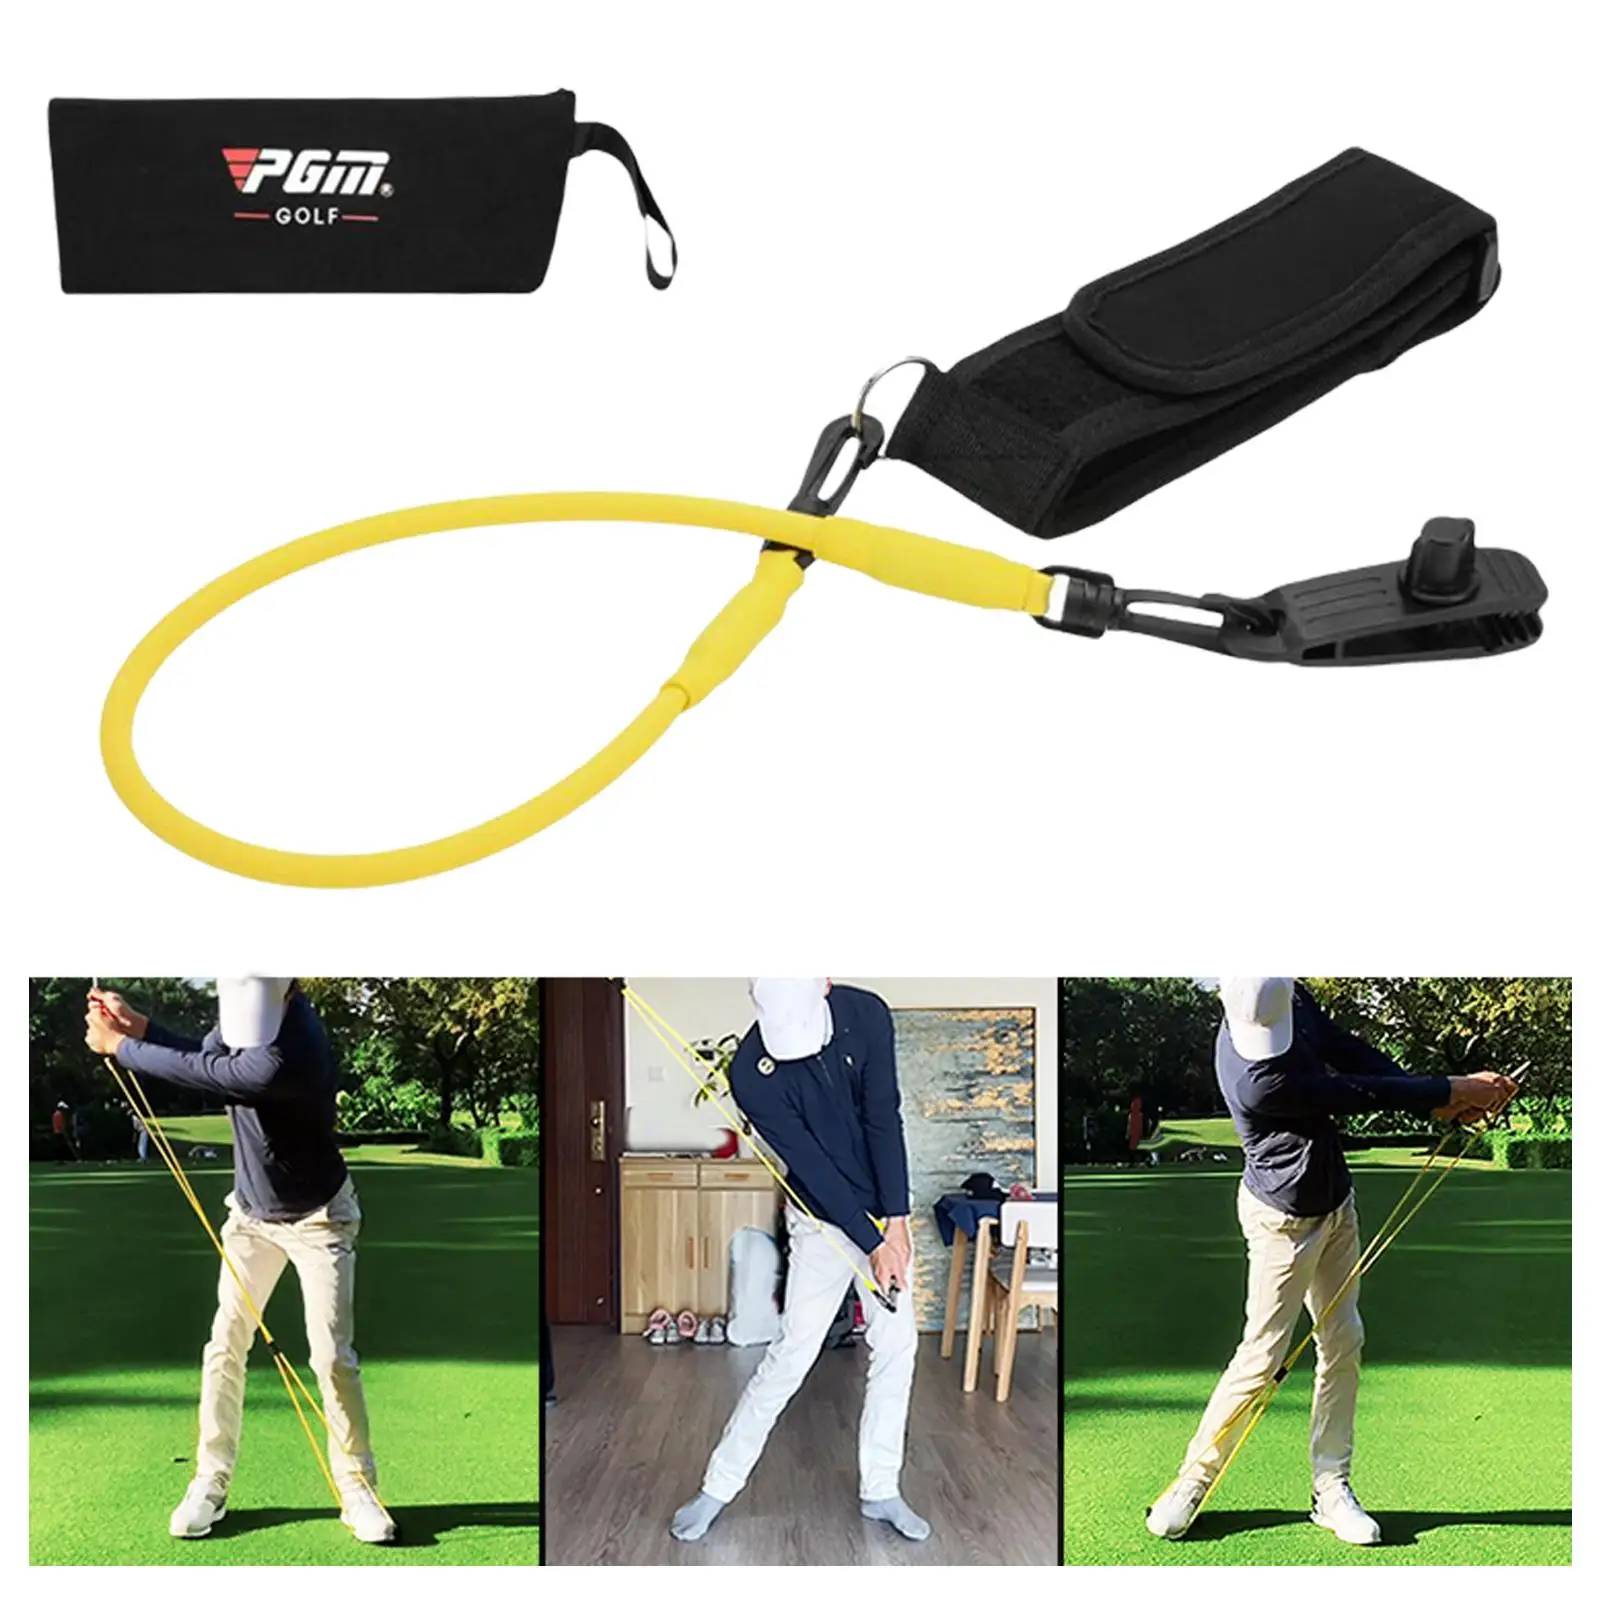 

Golf Swing Trainer Waist Band Belt Posture Correction Gesture Alignment Guide Training Teaching Supplies for Golfers